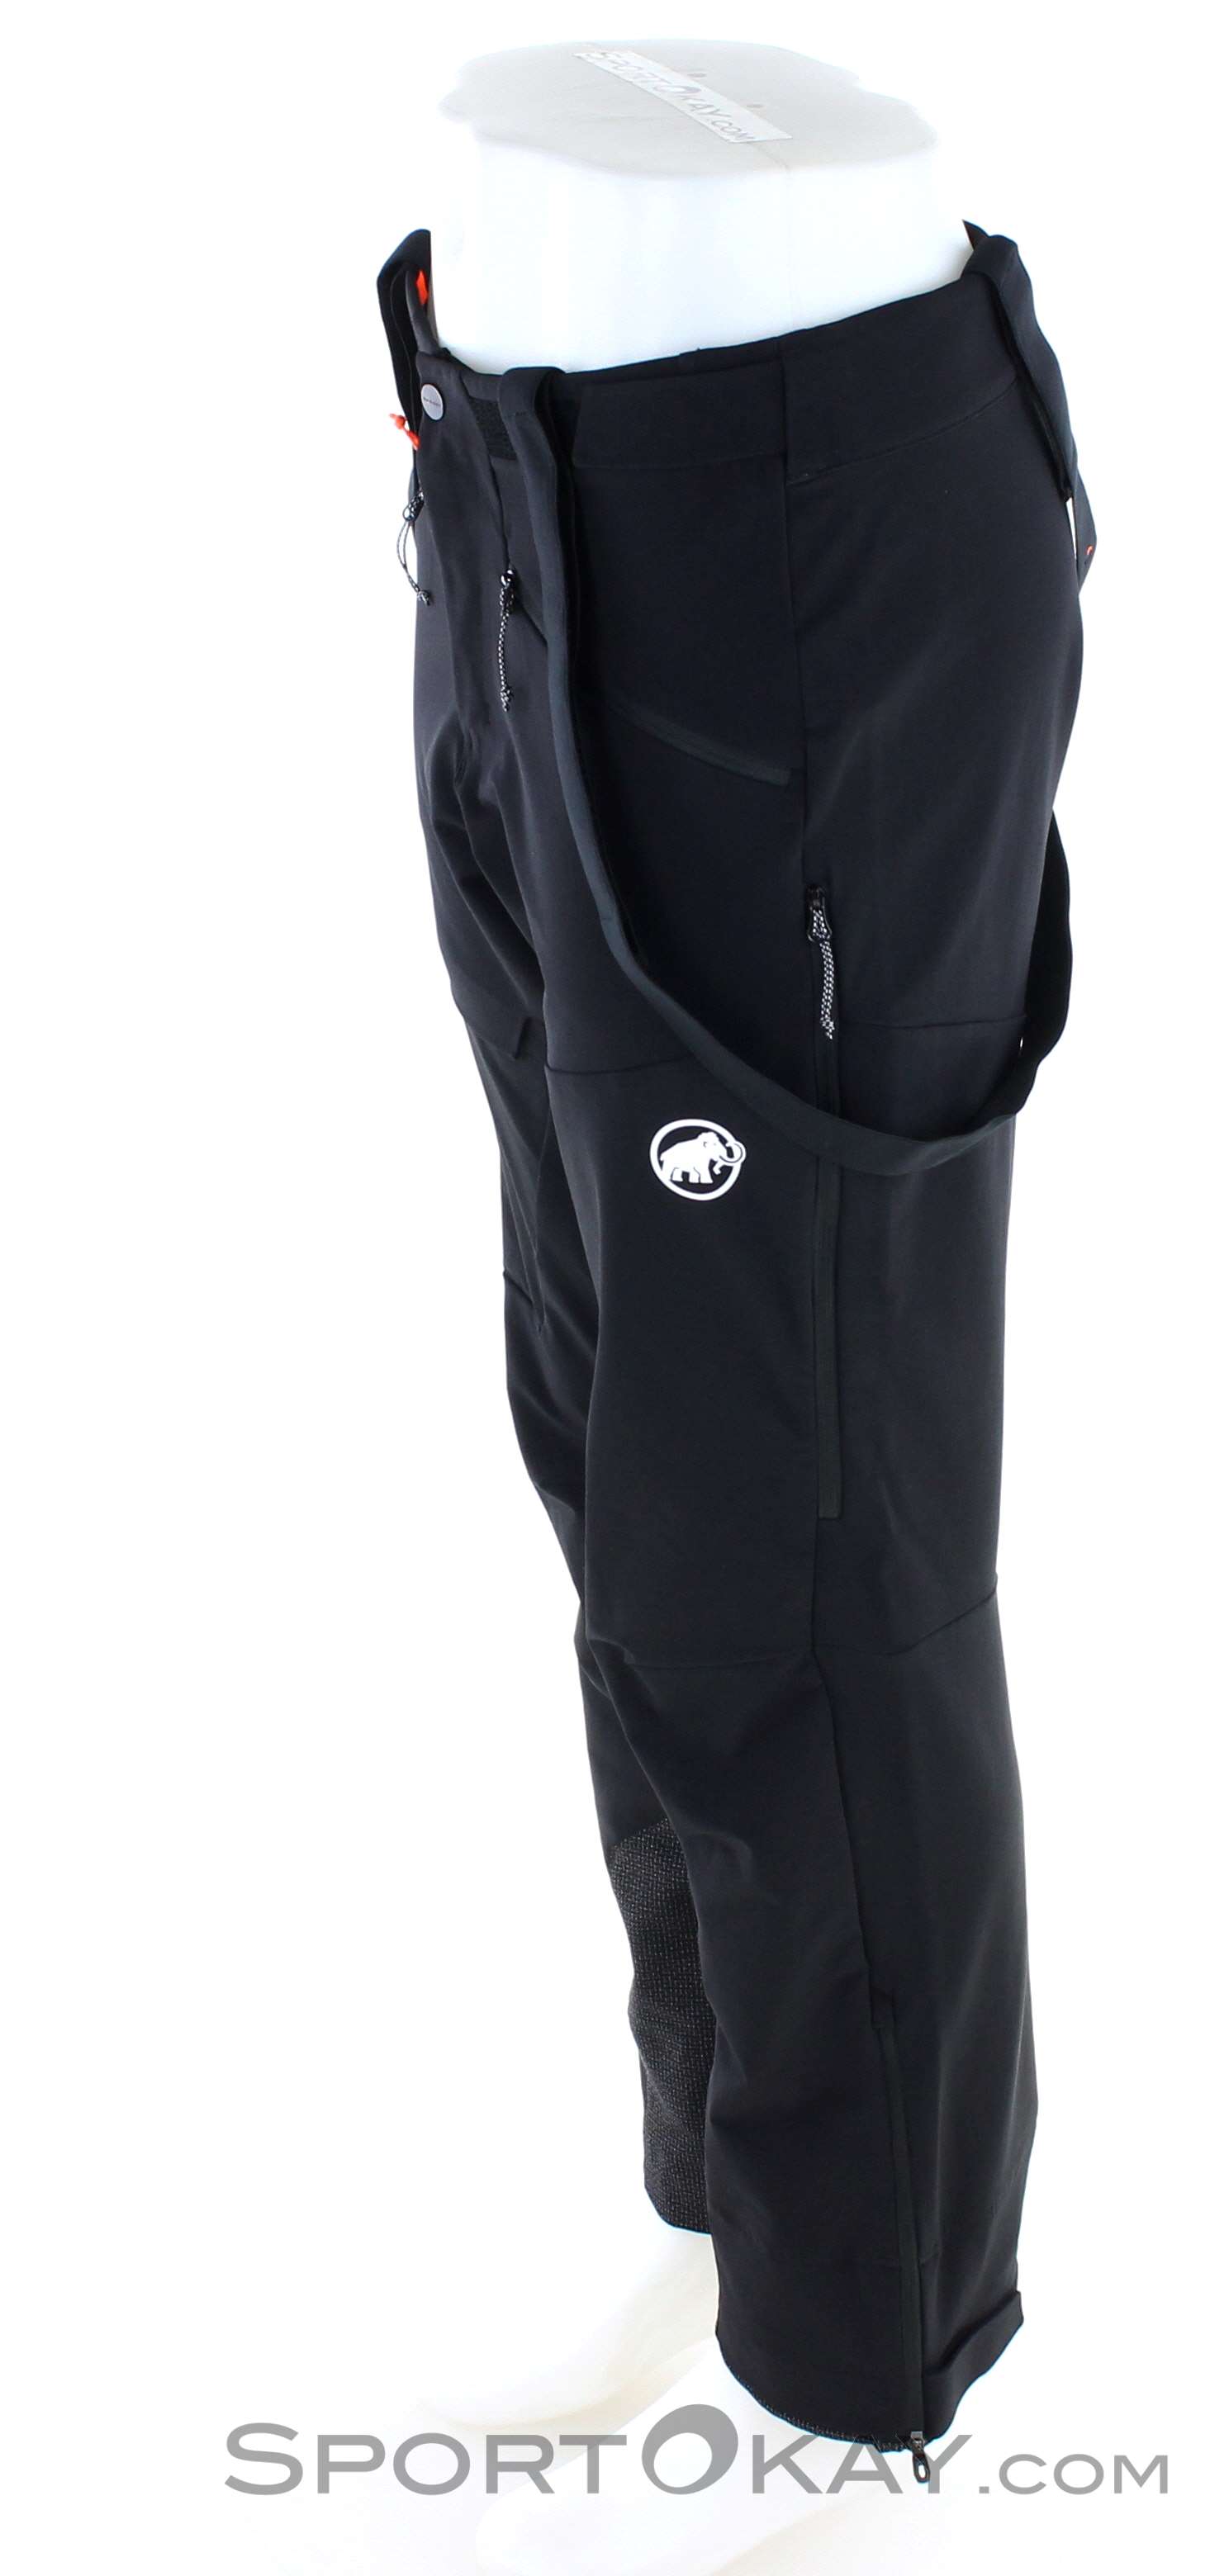 Mammut Taiss Pro SO Ski Pants  The BackCountry in Truckee, CA - The  BackCountry